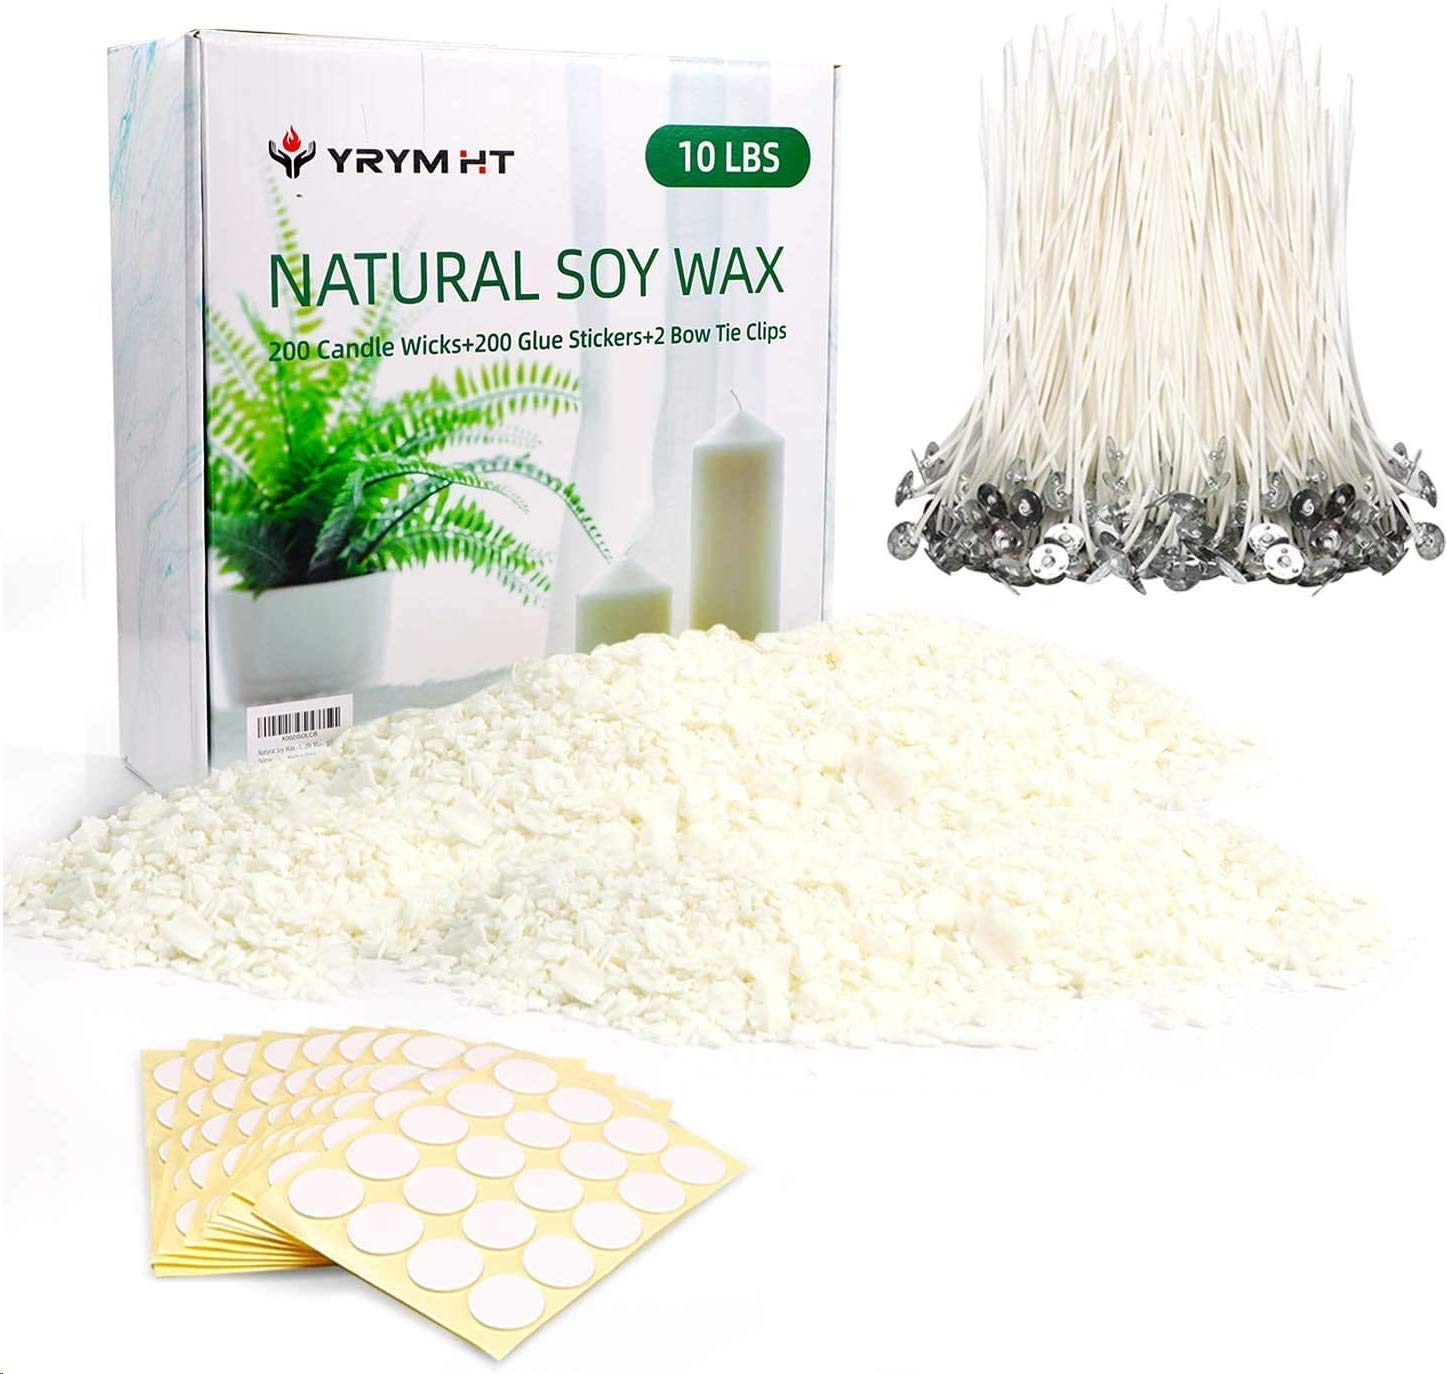 Soy Wax 10lb and Candle Making Supplies with 200,6-Inch Pre-Waxed Wicks,  200 Candle Wick Stickers A-10lb Soy Wax + Accessories